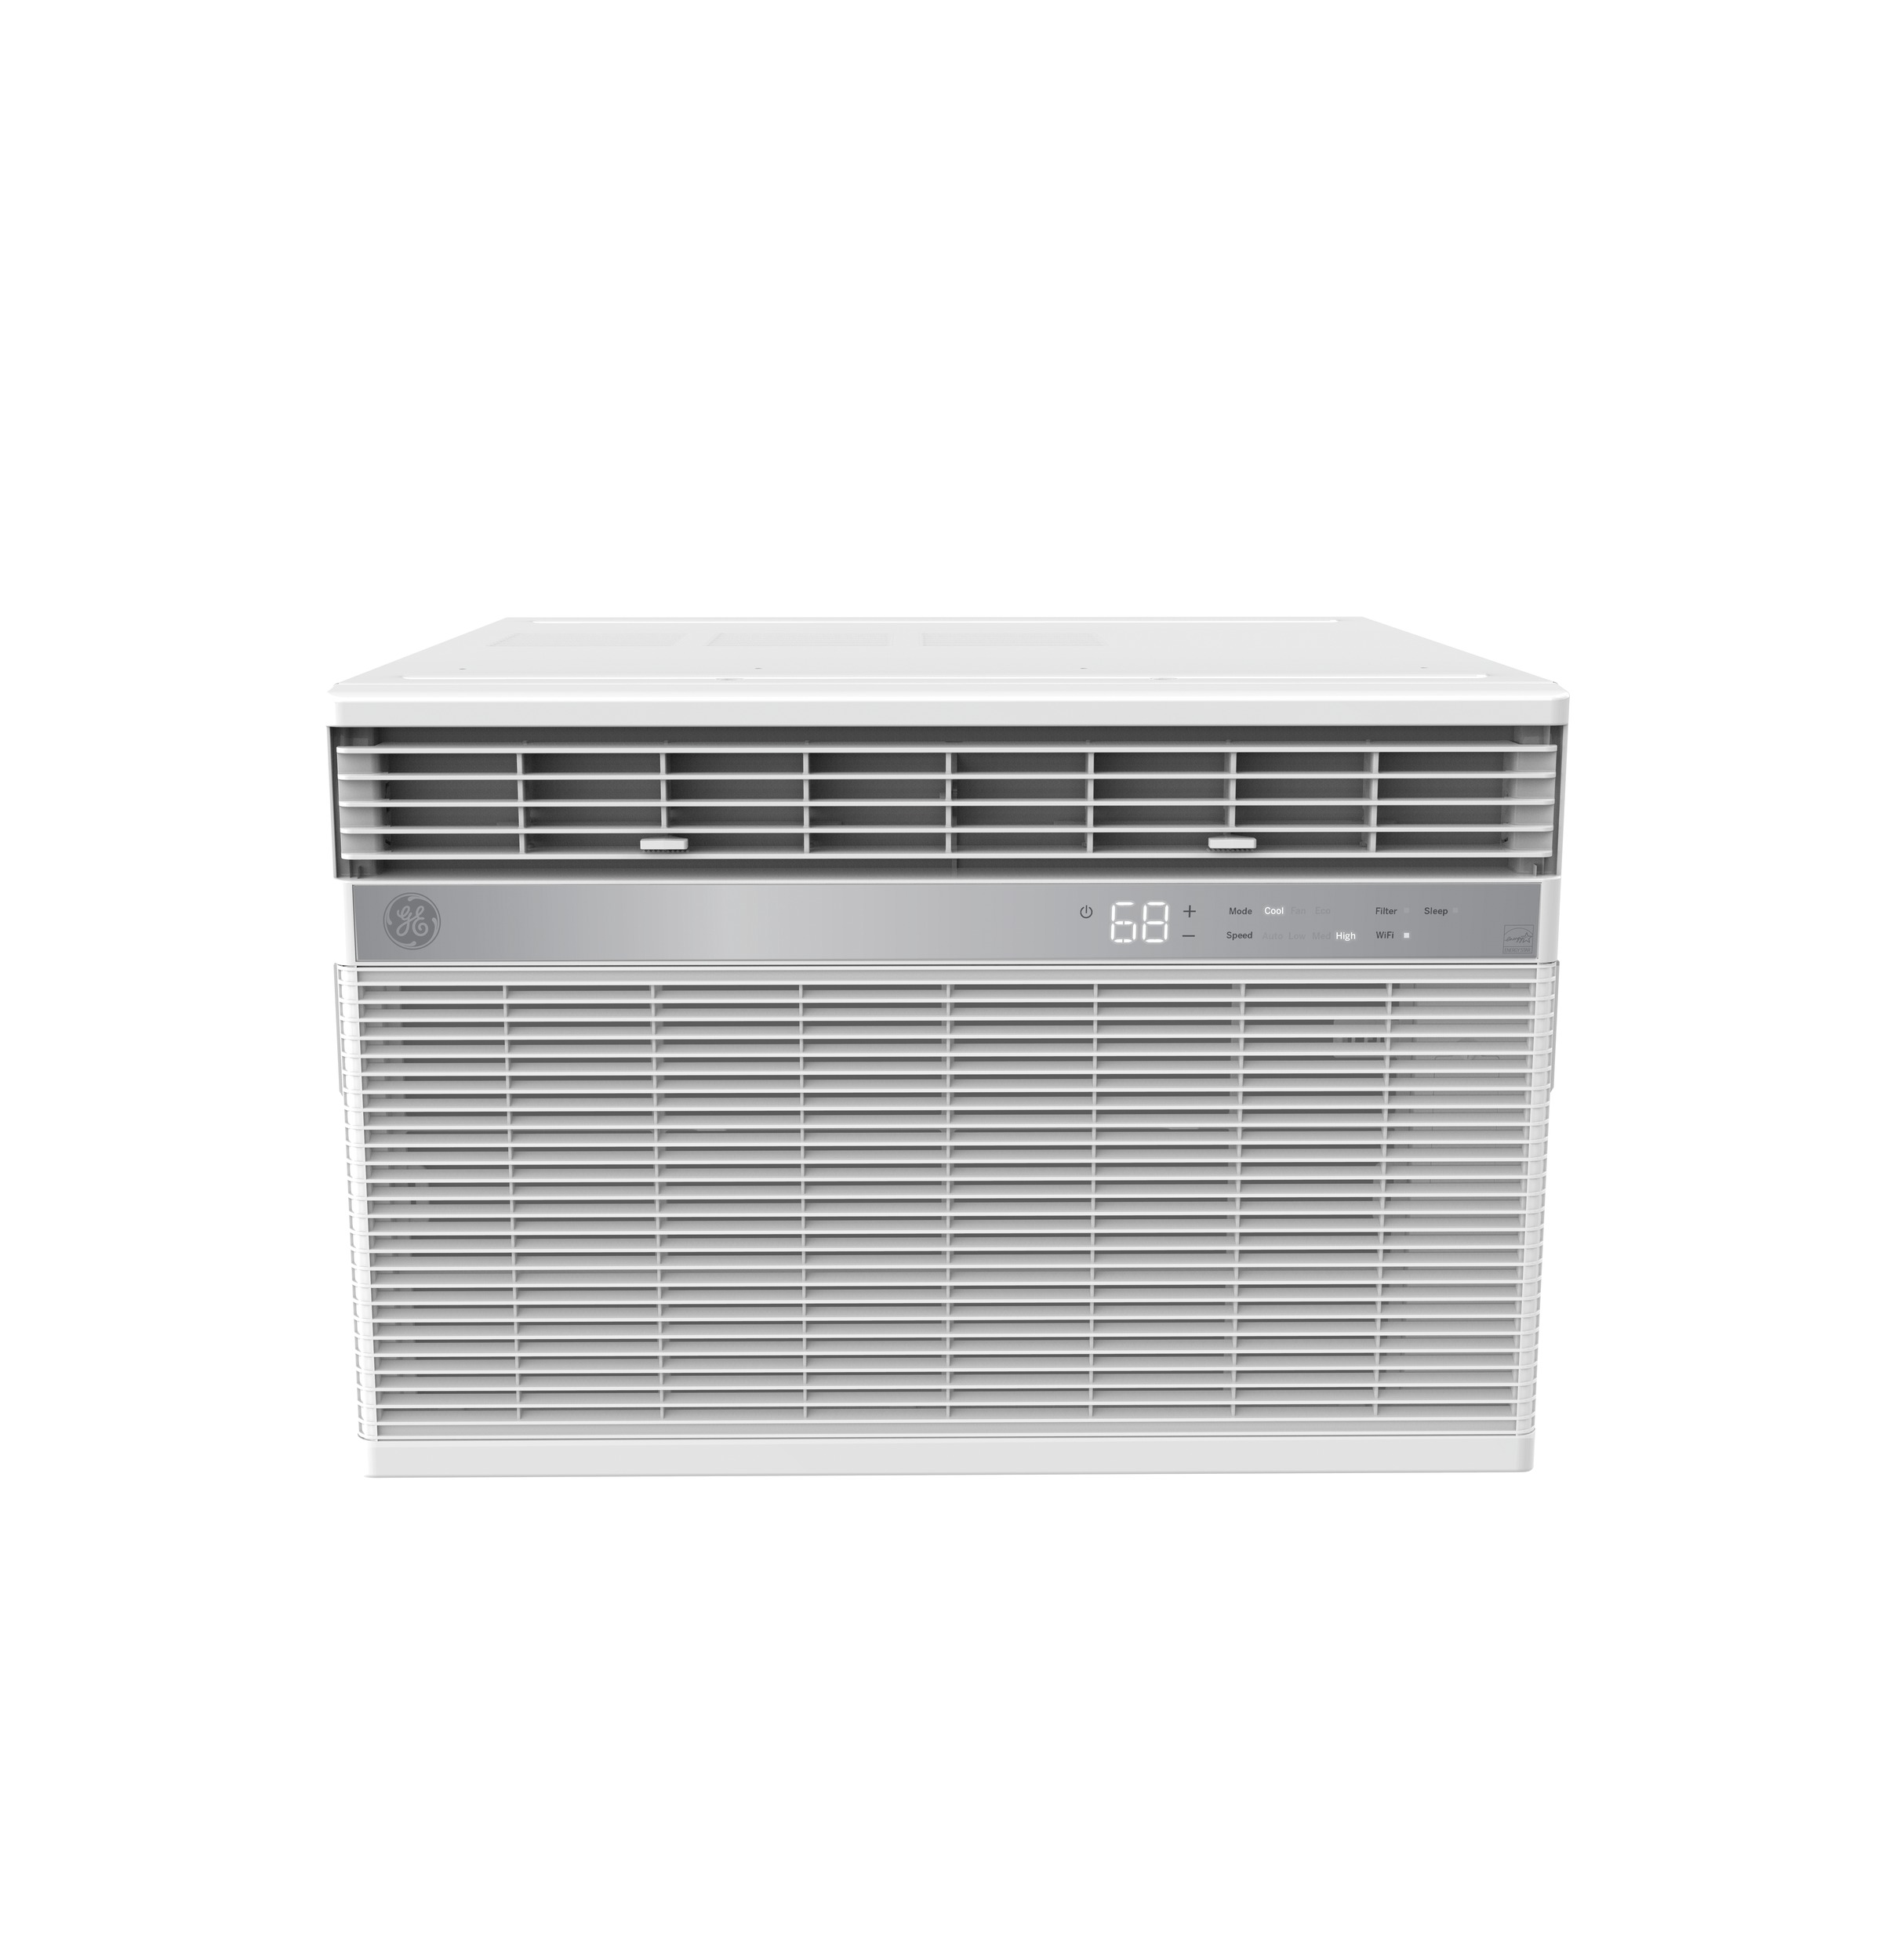 GE® ENERGY STAR® 23,500 BTU Electronic Window Air Conditioner for Extra-Large Rooms up to 1500 sq. ft.